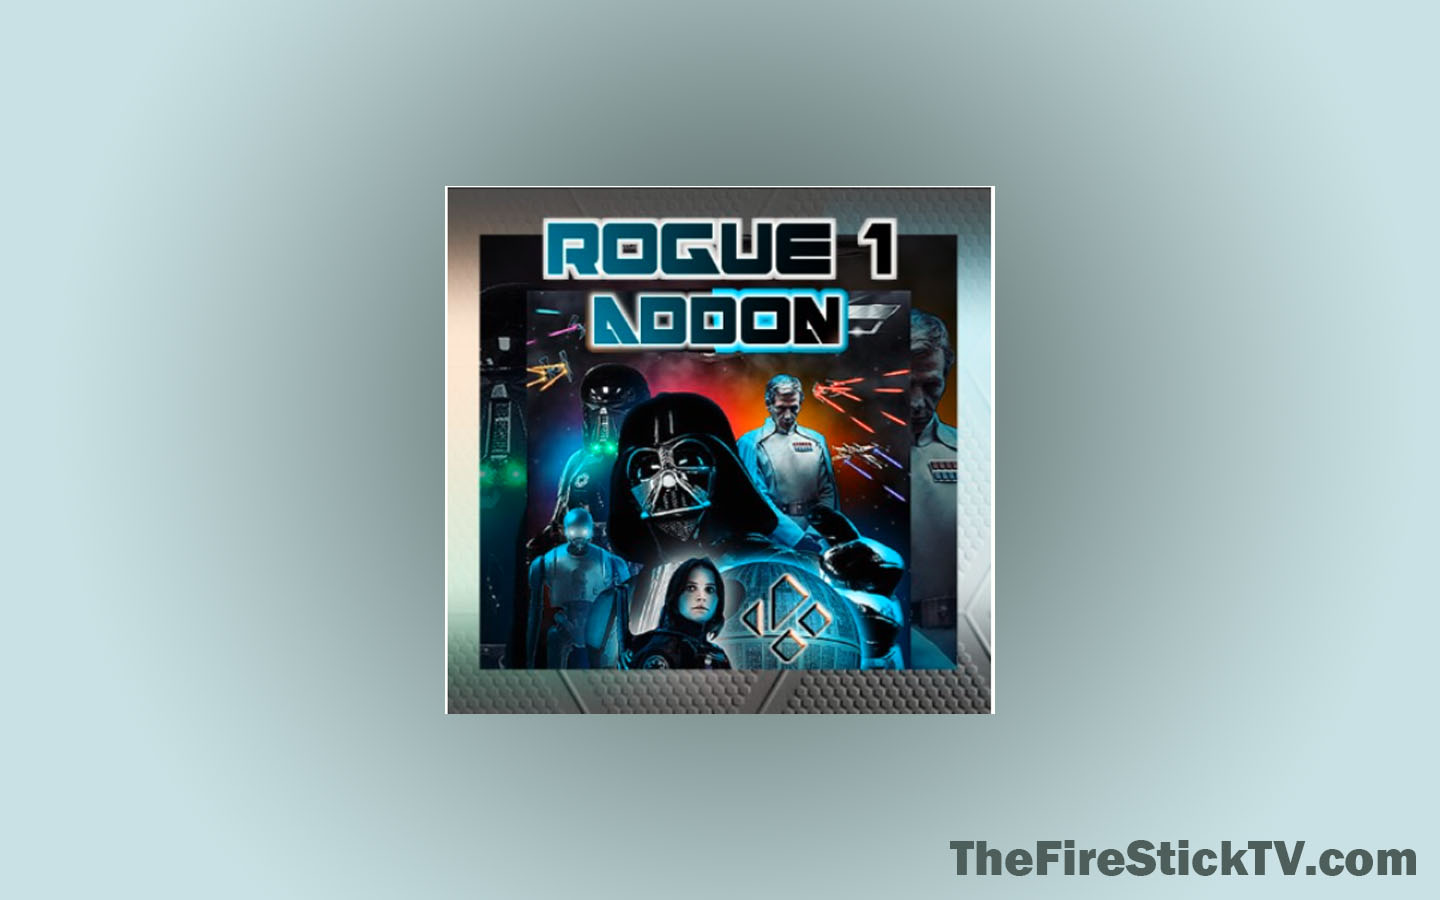 How To Install Rogue One Kodi Addon in 2 minutes - TheFireStickTV.com